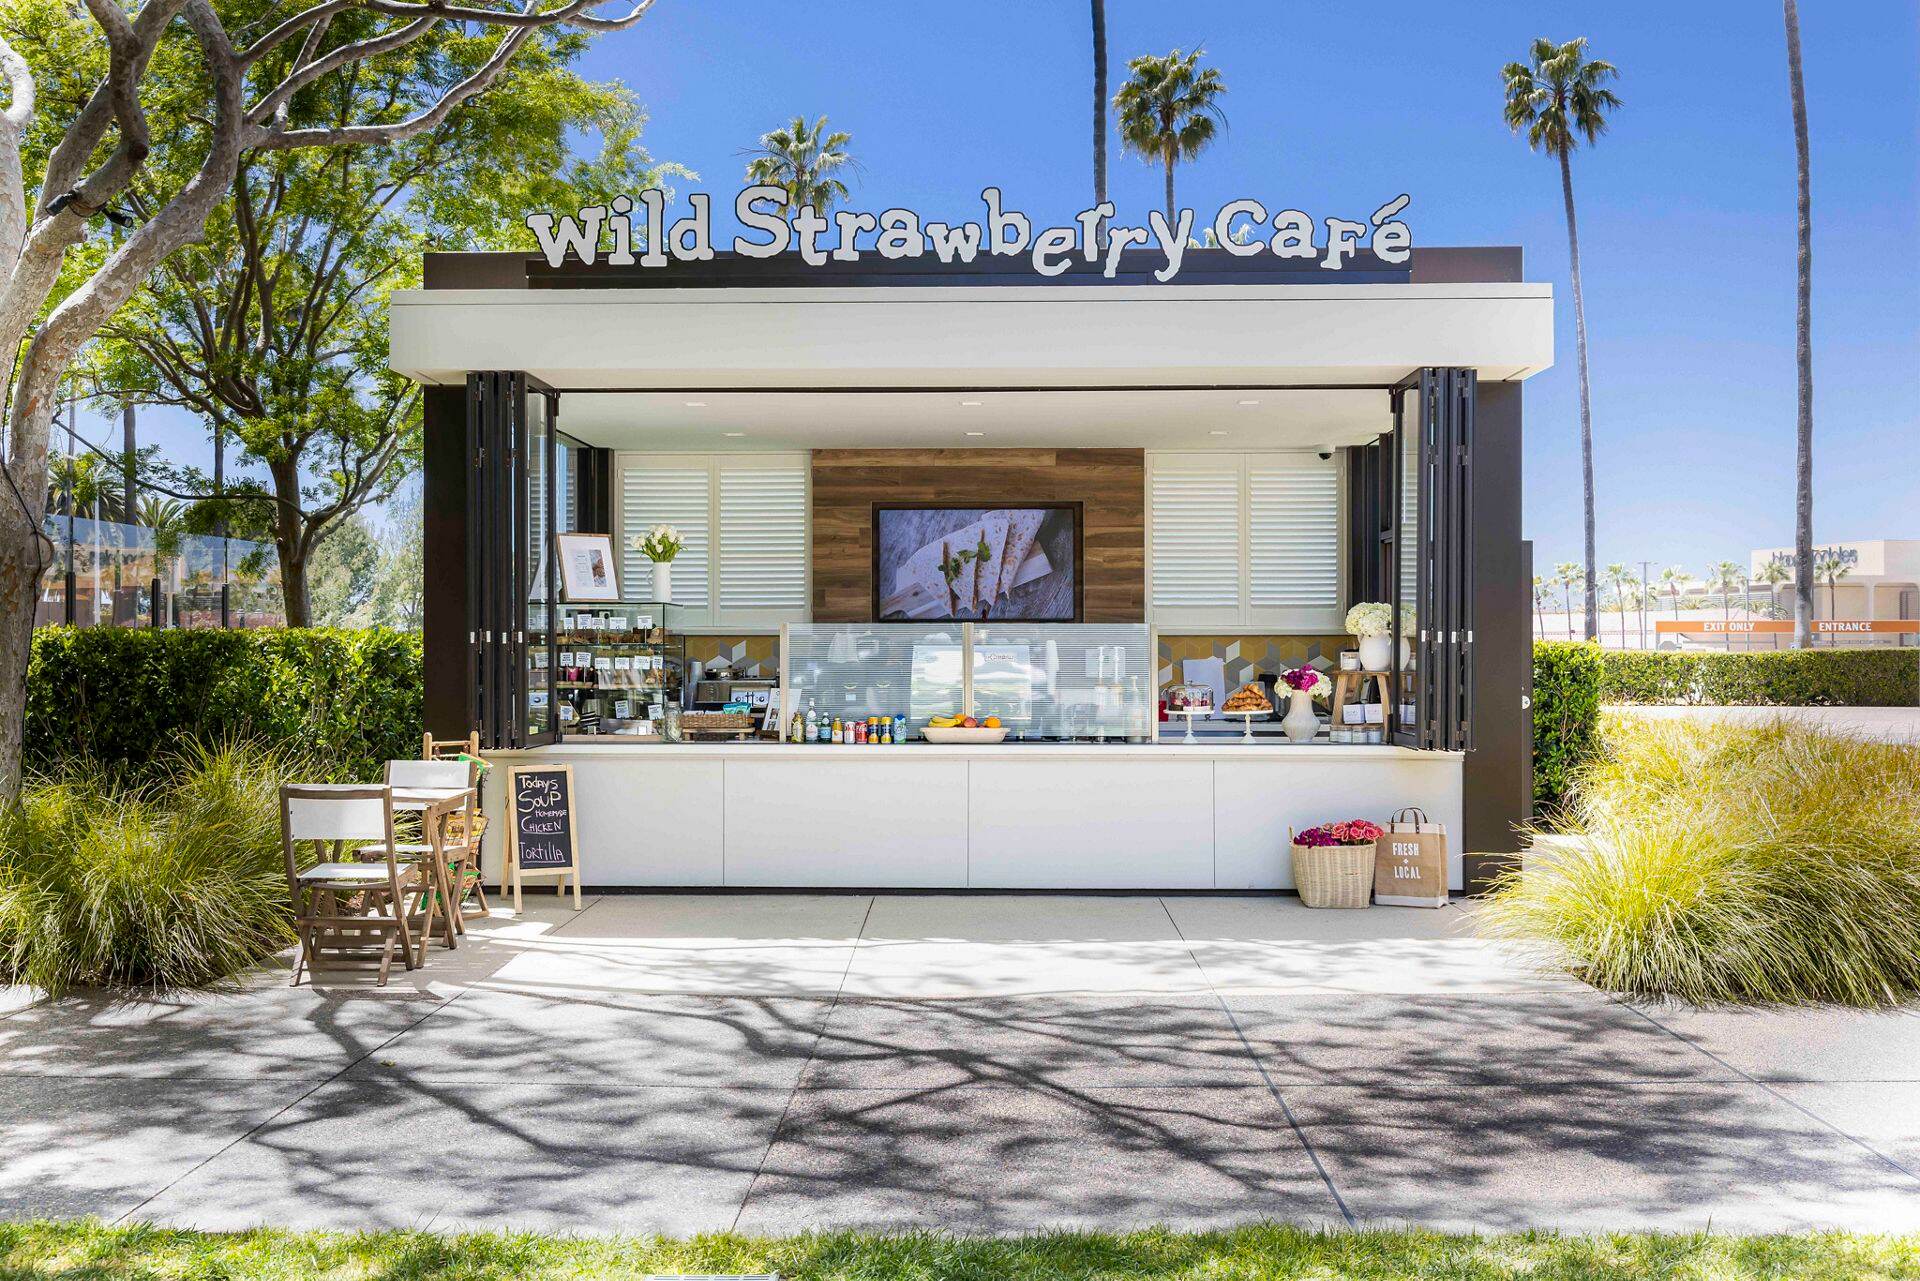 Wild Strawberry Cafe Kiosk at 610 Newport Center Drive.